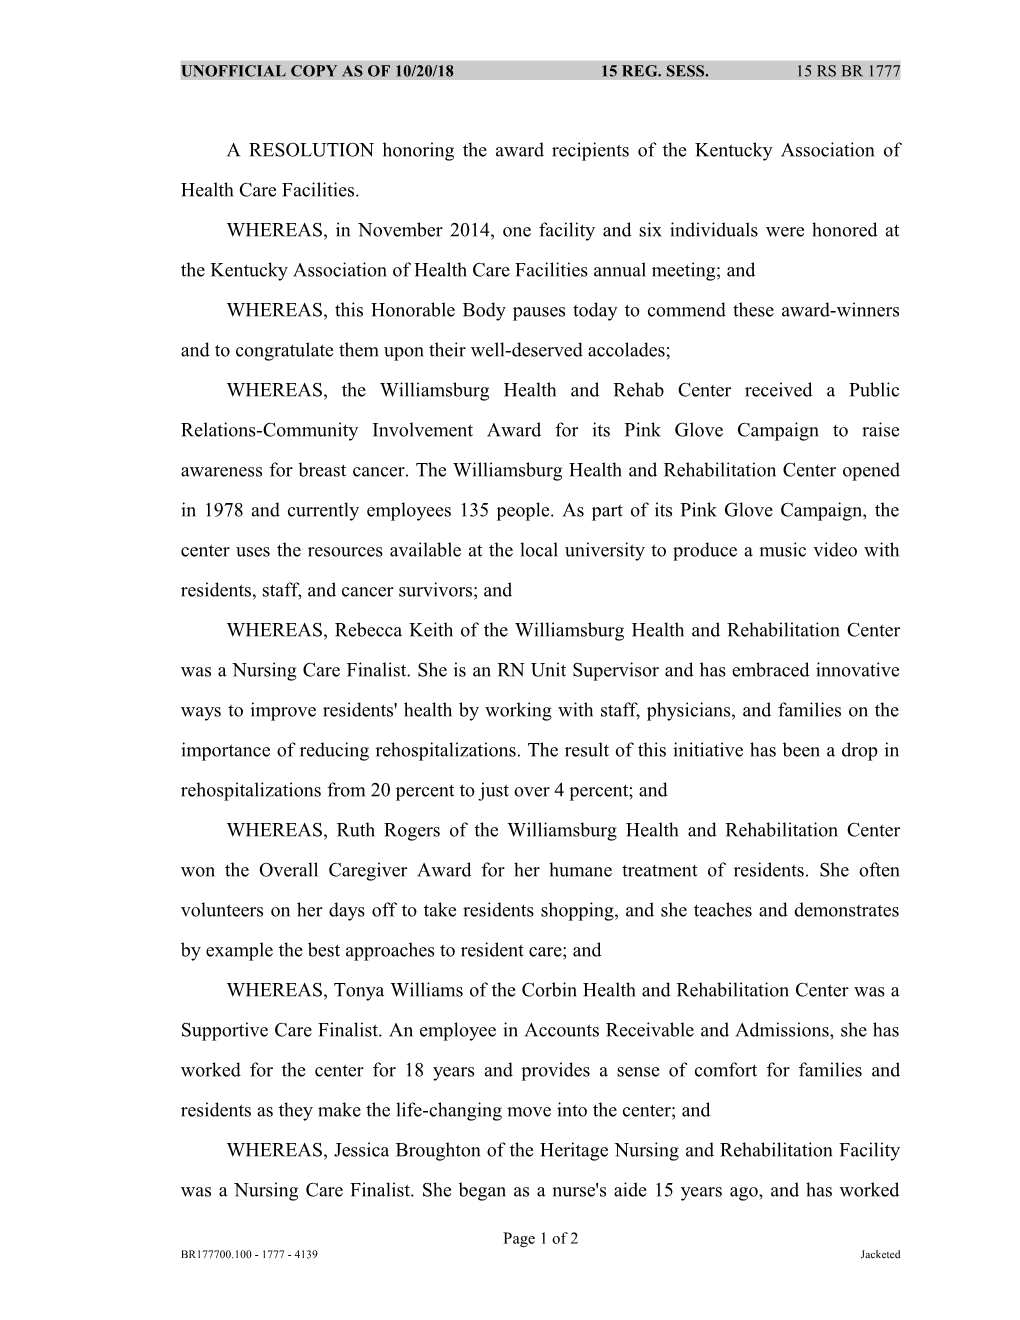 A RESOLUTION Honoring the Award Recipients of the Kentucky Association of Health Care Facilities